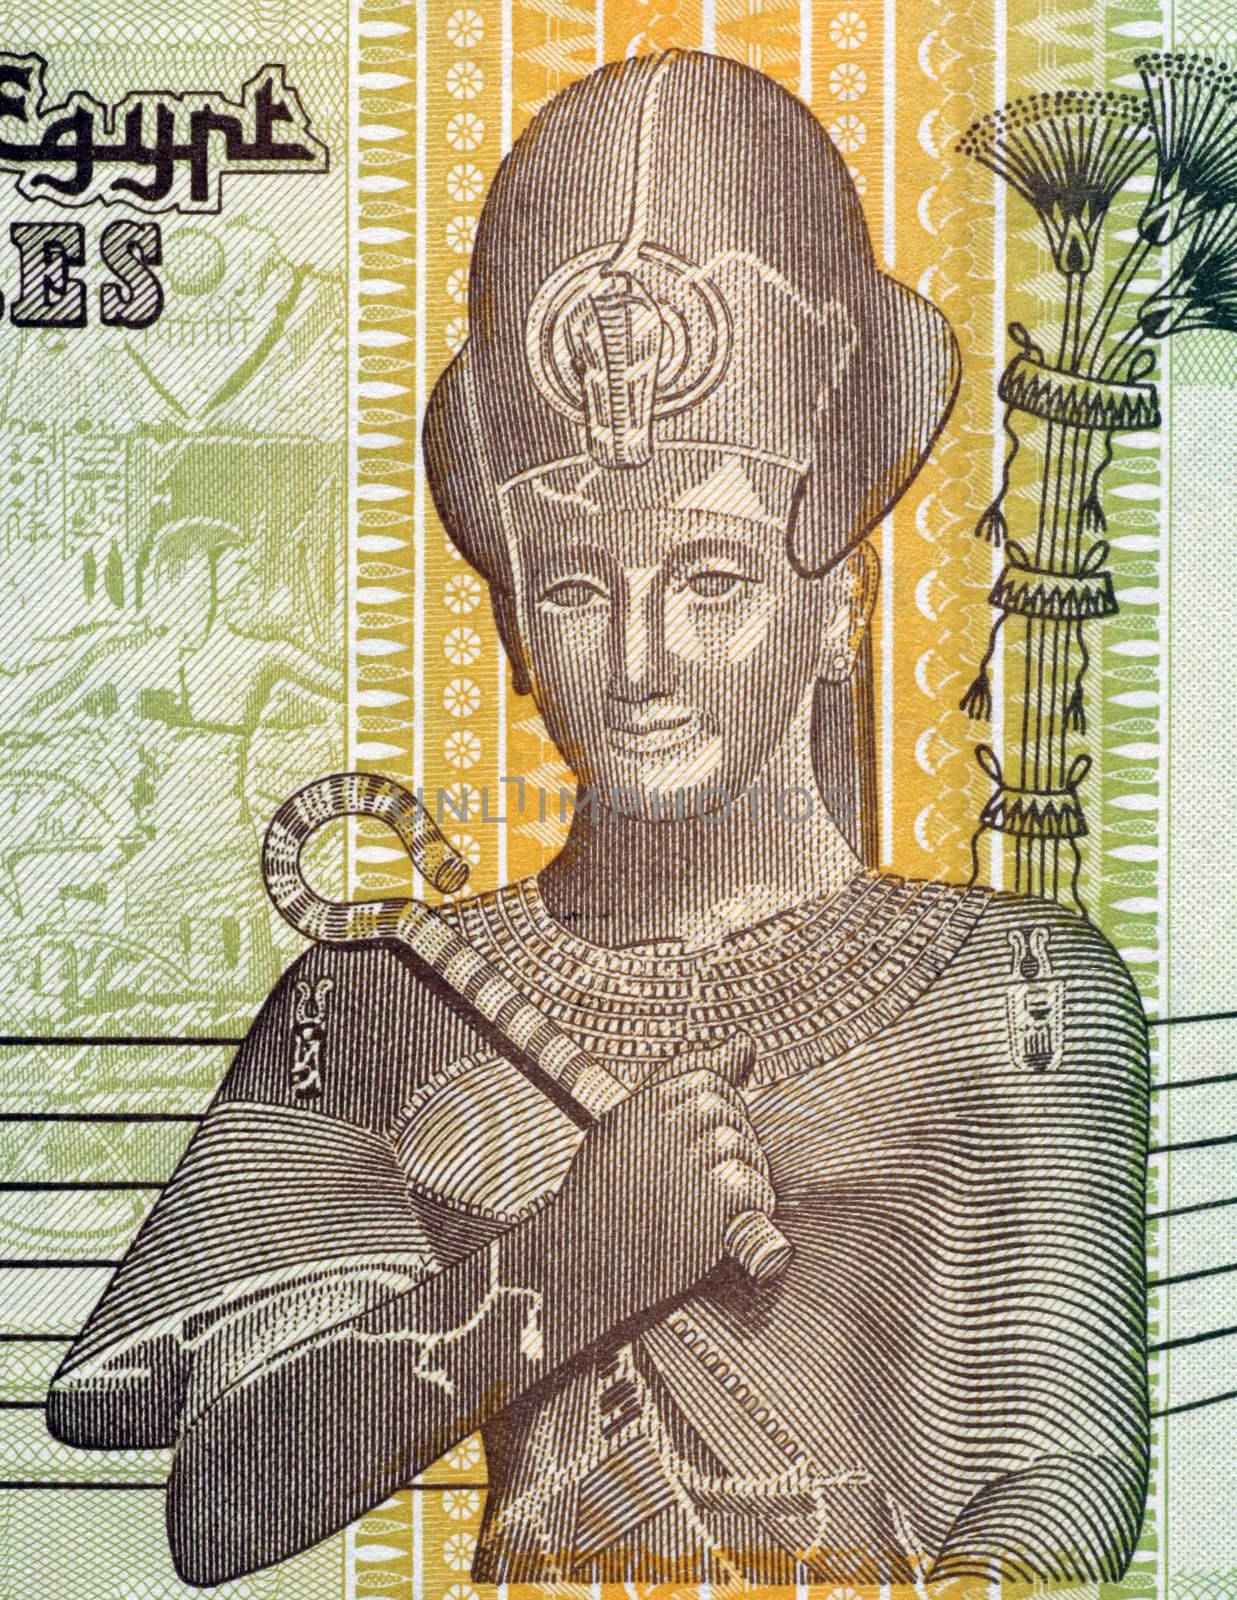 Pharaoh Ramses II on 50 Piastres Banknote from Egypt